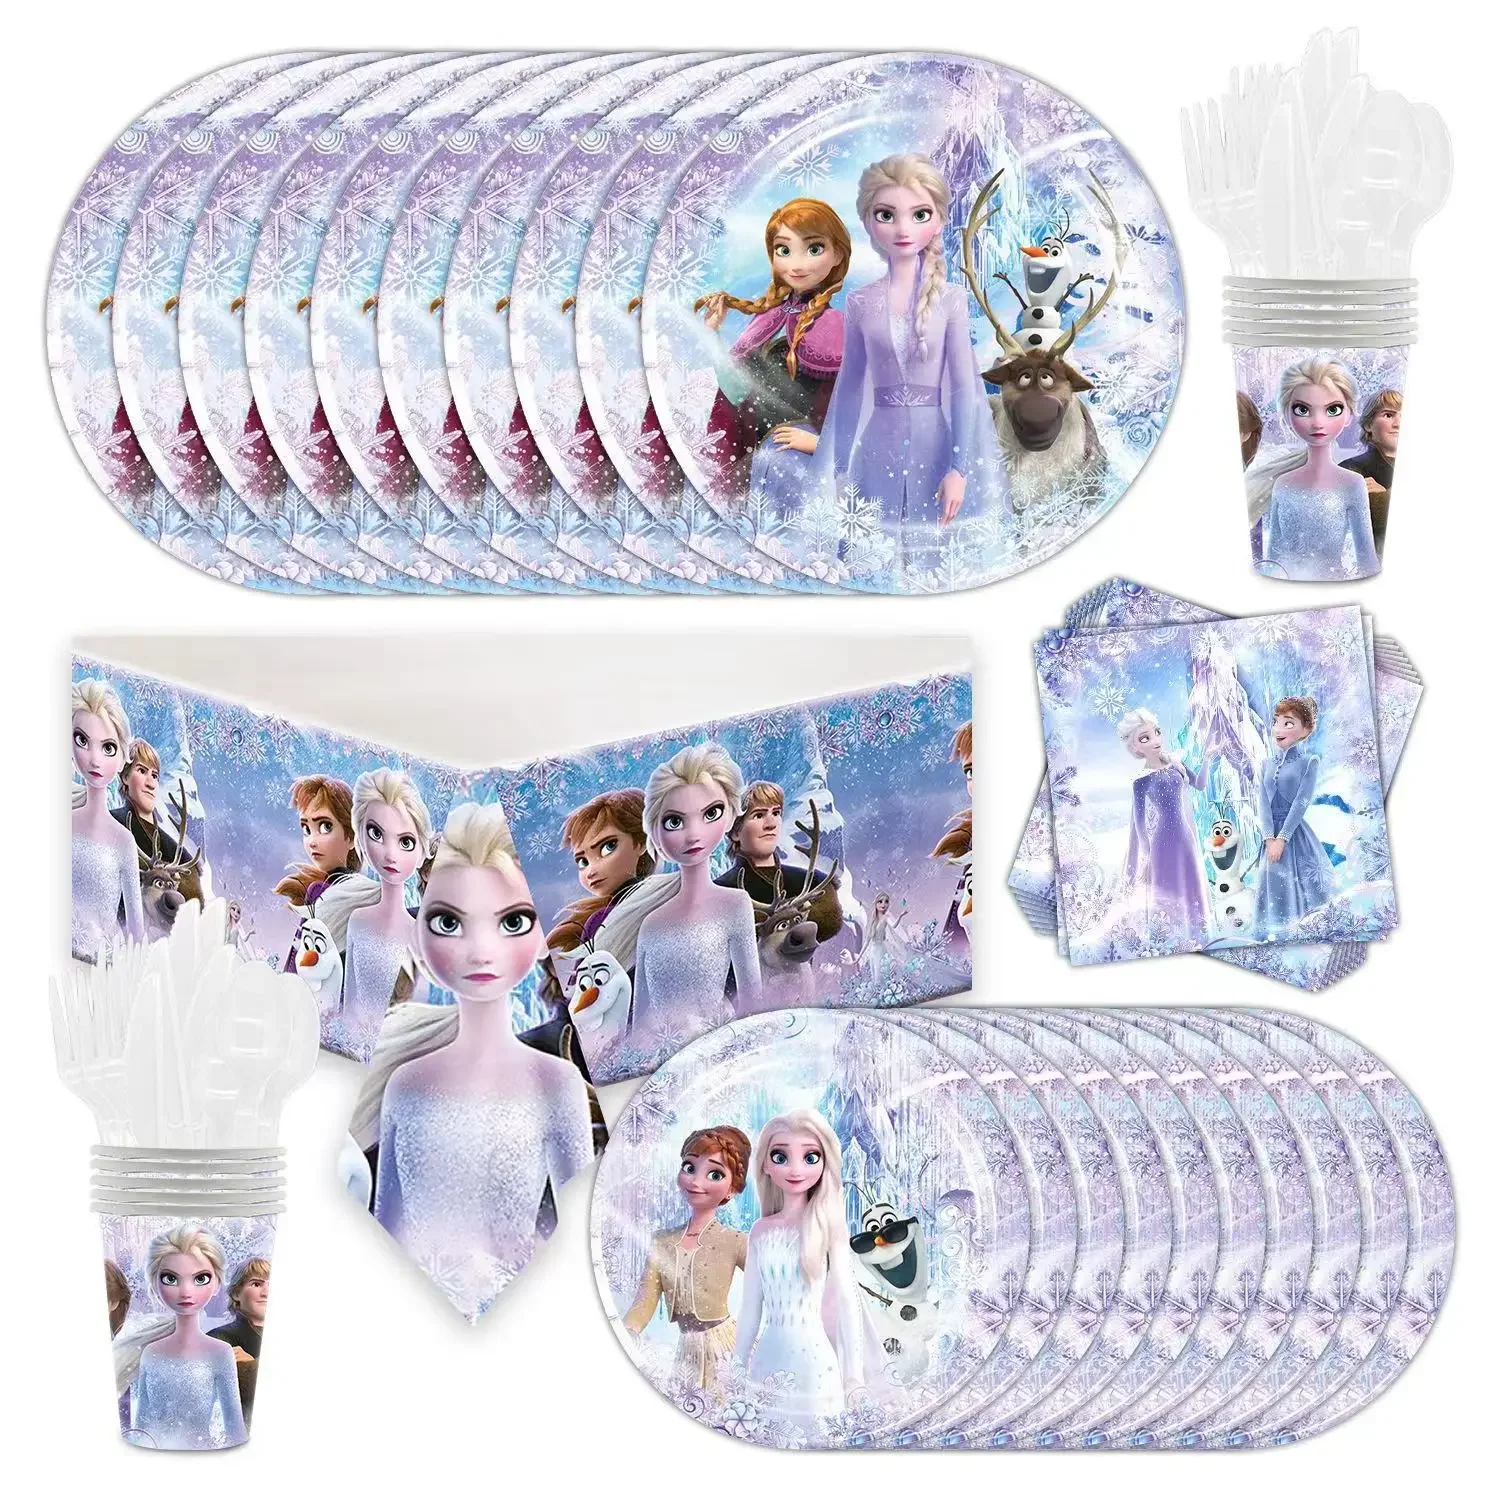 Disney Frozen Elsa Anna Princess Girl Favor Birthday Party Decor Disposable Tableware Cup Plate Straw Banner Balloon Supplies frozen anna elsa princess photography backgrounds decoration vinyl cloth backdrops for kids girls birthday gifts party supplies